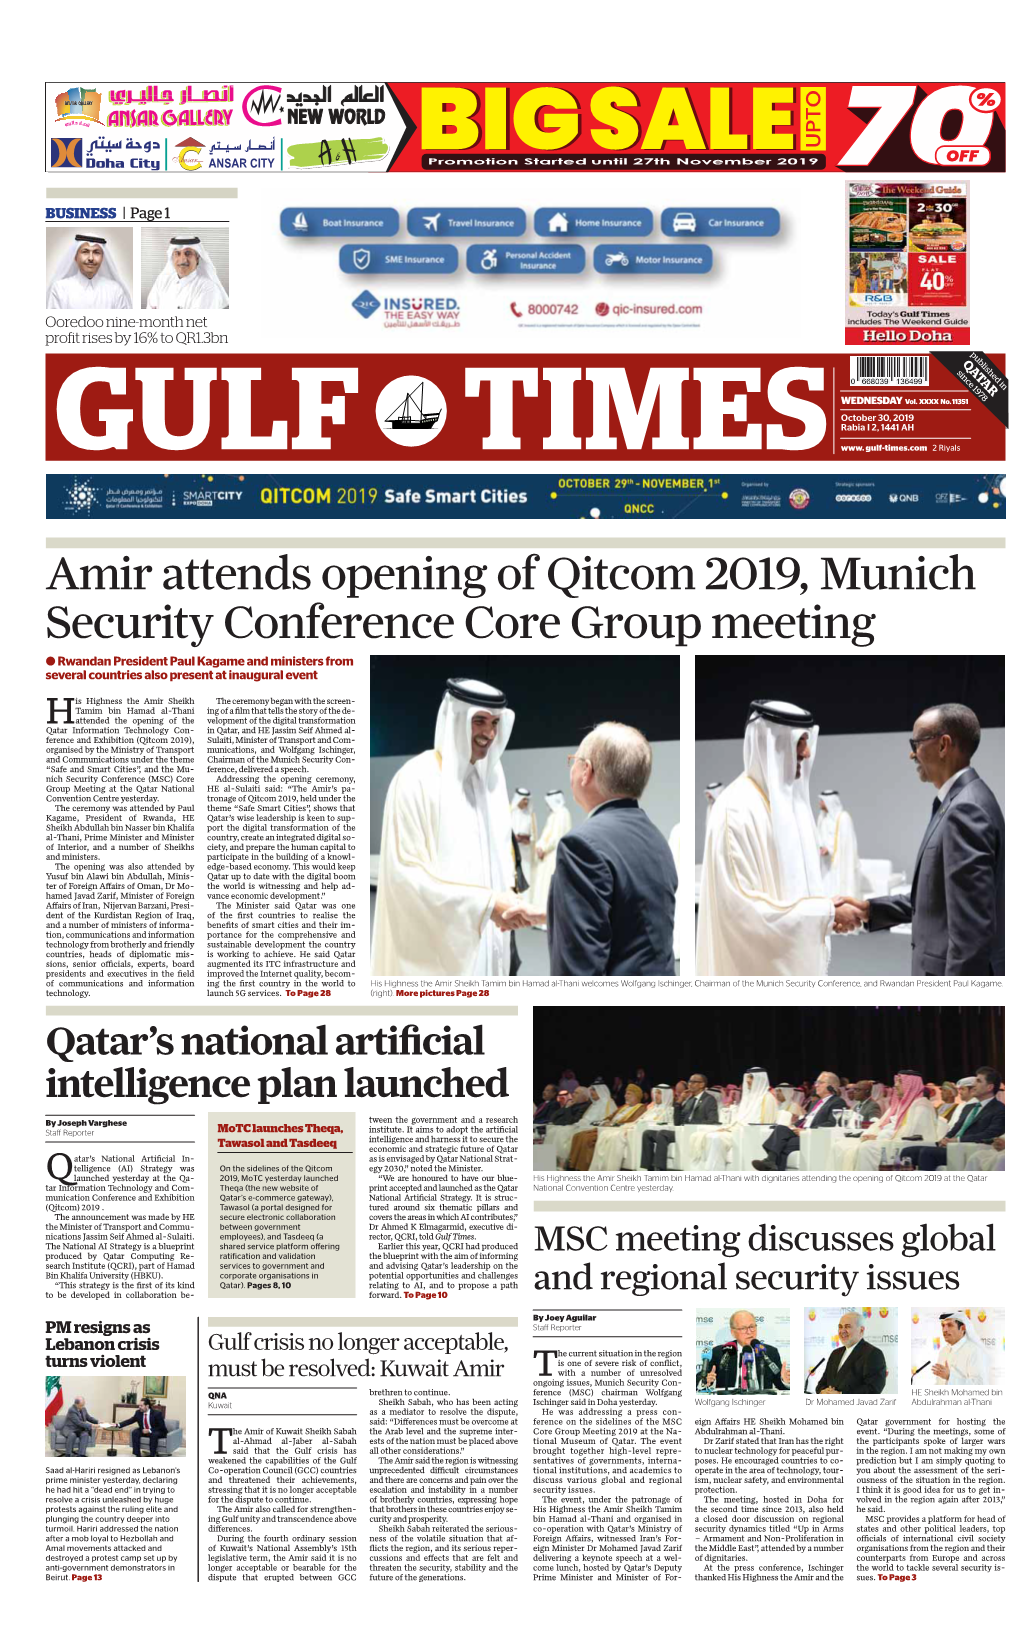 Amir Attends Opening of Qitcom 2019, Munich Security Conference Core